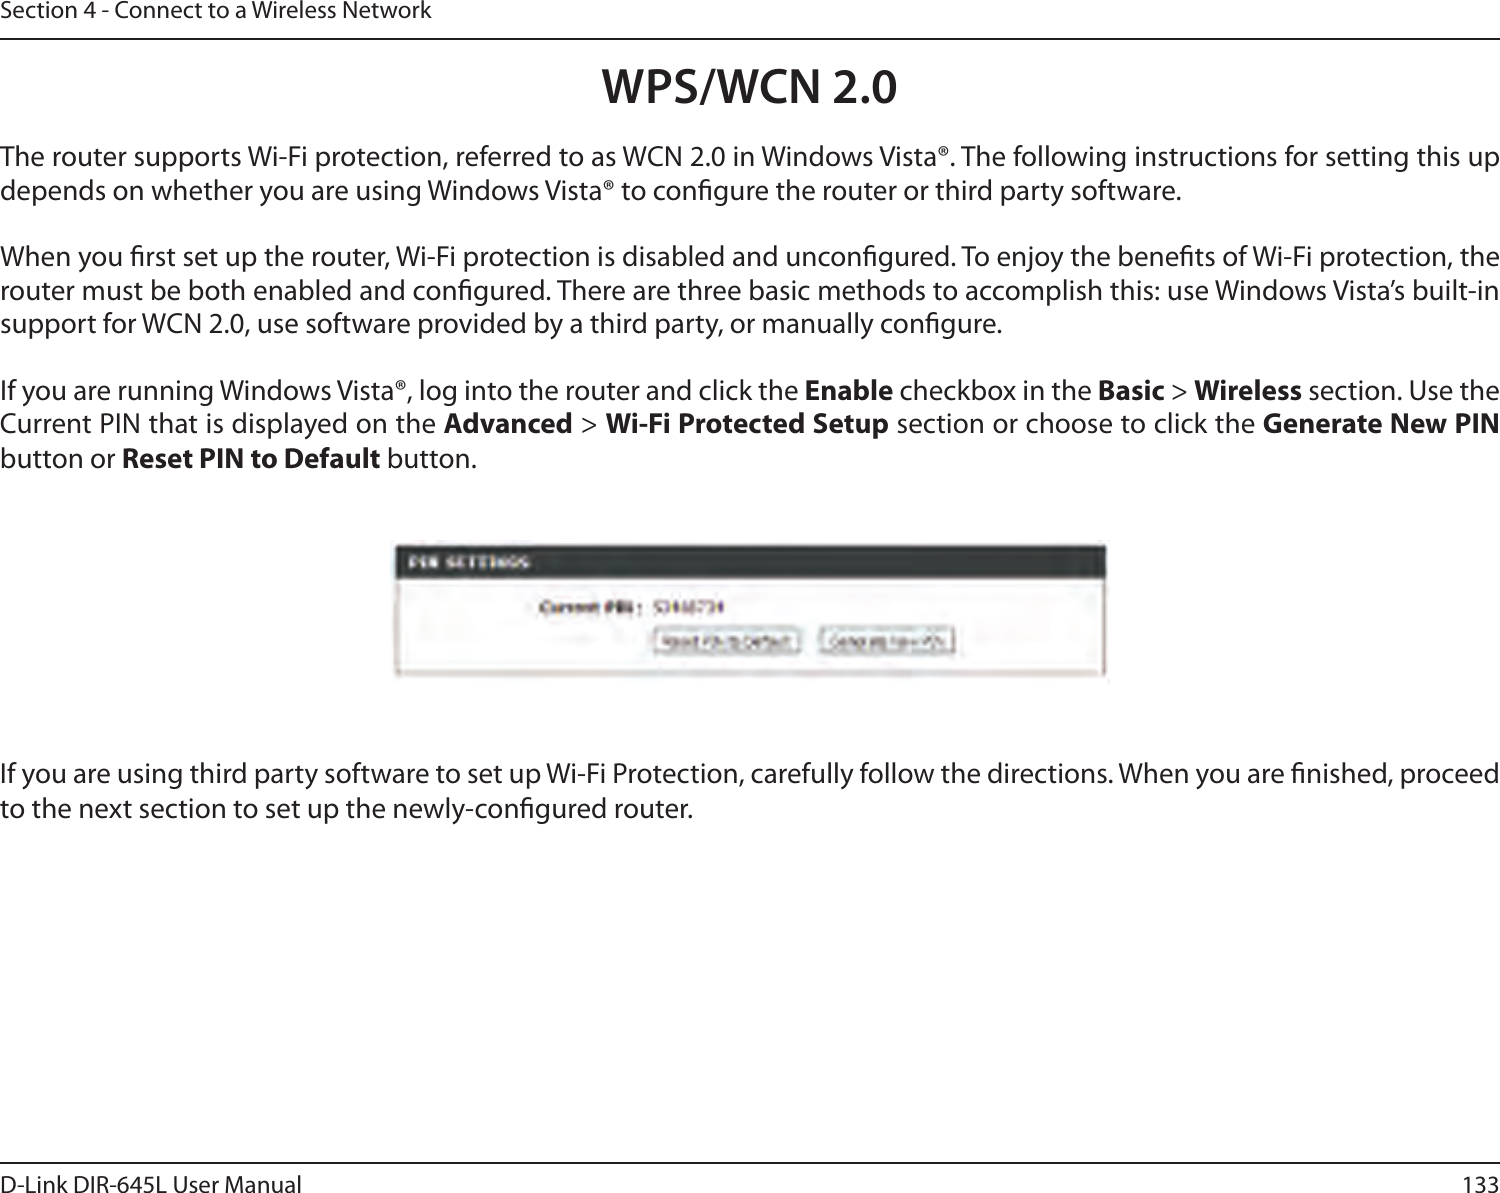 133D-Link DIR-645L User ManualSection 4 - Connect to a Wireless NetworkWPS/WCN 2.0The router supports Wi-Fi protection, referred to as WCN 2.0 in Windows Vista®. The following instructions for setting this up depends on whether you are using Windows Vista® to congure the router or third party software.        When you rst set up the router, Wi-Fi protection is disabled and uncongured. To enjoy the benets of Wi-Fi protection, the router must be both enabled and congured. There are three basic methods to accomplish this: use Windows Vista’s built-in support for WCN 2.0, use software provided by a third party, or manually congure. If you are running Windows Vista®, log into the router and click the Enable checkbox in the Basic &gt; Wireless section. Use the Current PIN that is displayed on the Advanced &gt; Wi-Fi Protected Setup section or choose to click the Generate New PIN button or Reset PIN to Default button. If you are using third party software to set up Wi-Fi Protection, carefully follow the directions. When you are nished, proceed to the next section to set up the newly-congured router. 